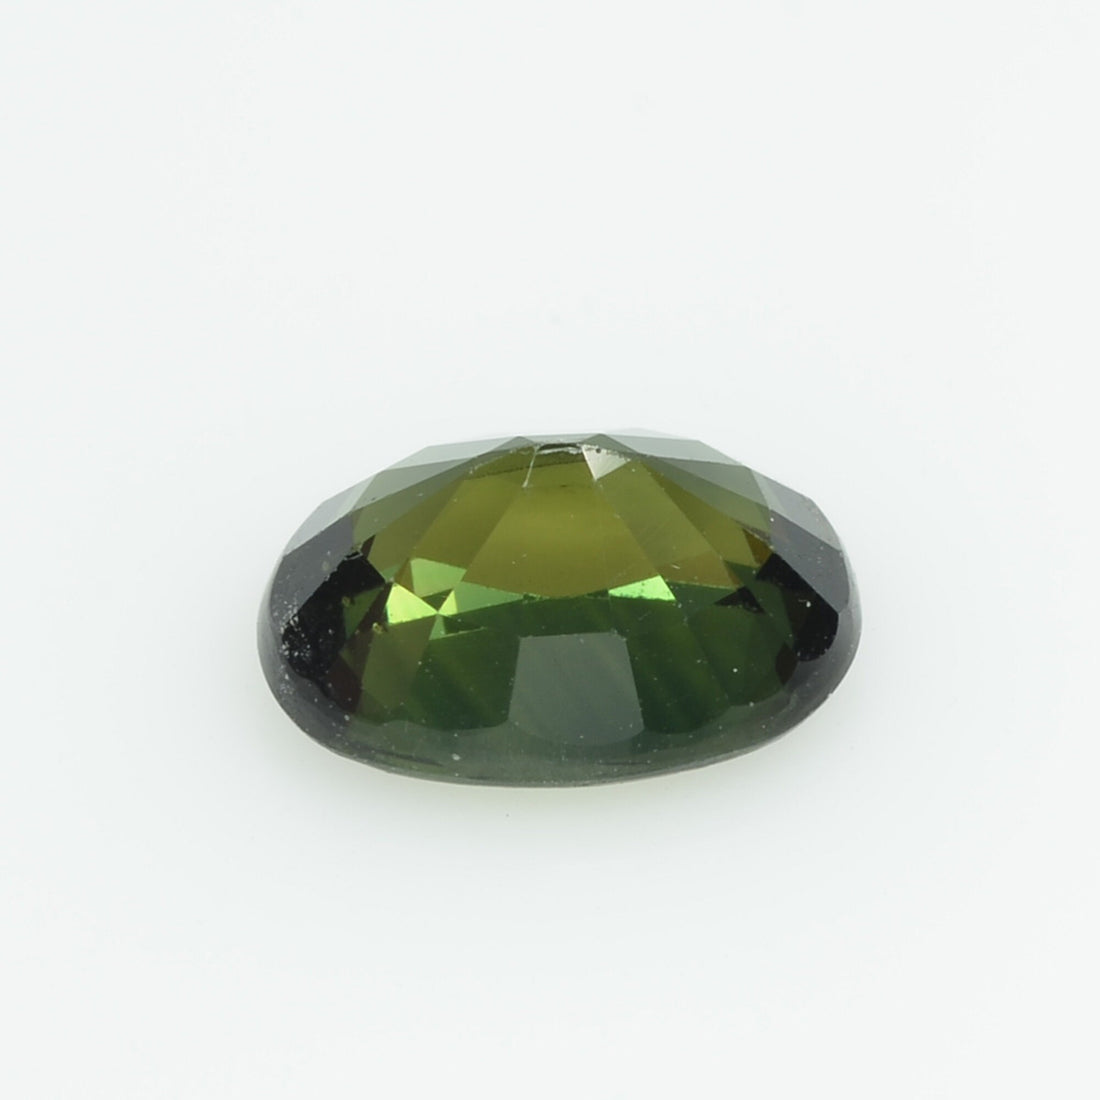 1.90 cts Natural Green Sapphire Loose Gemstone Oval Cut